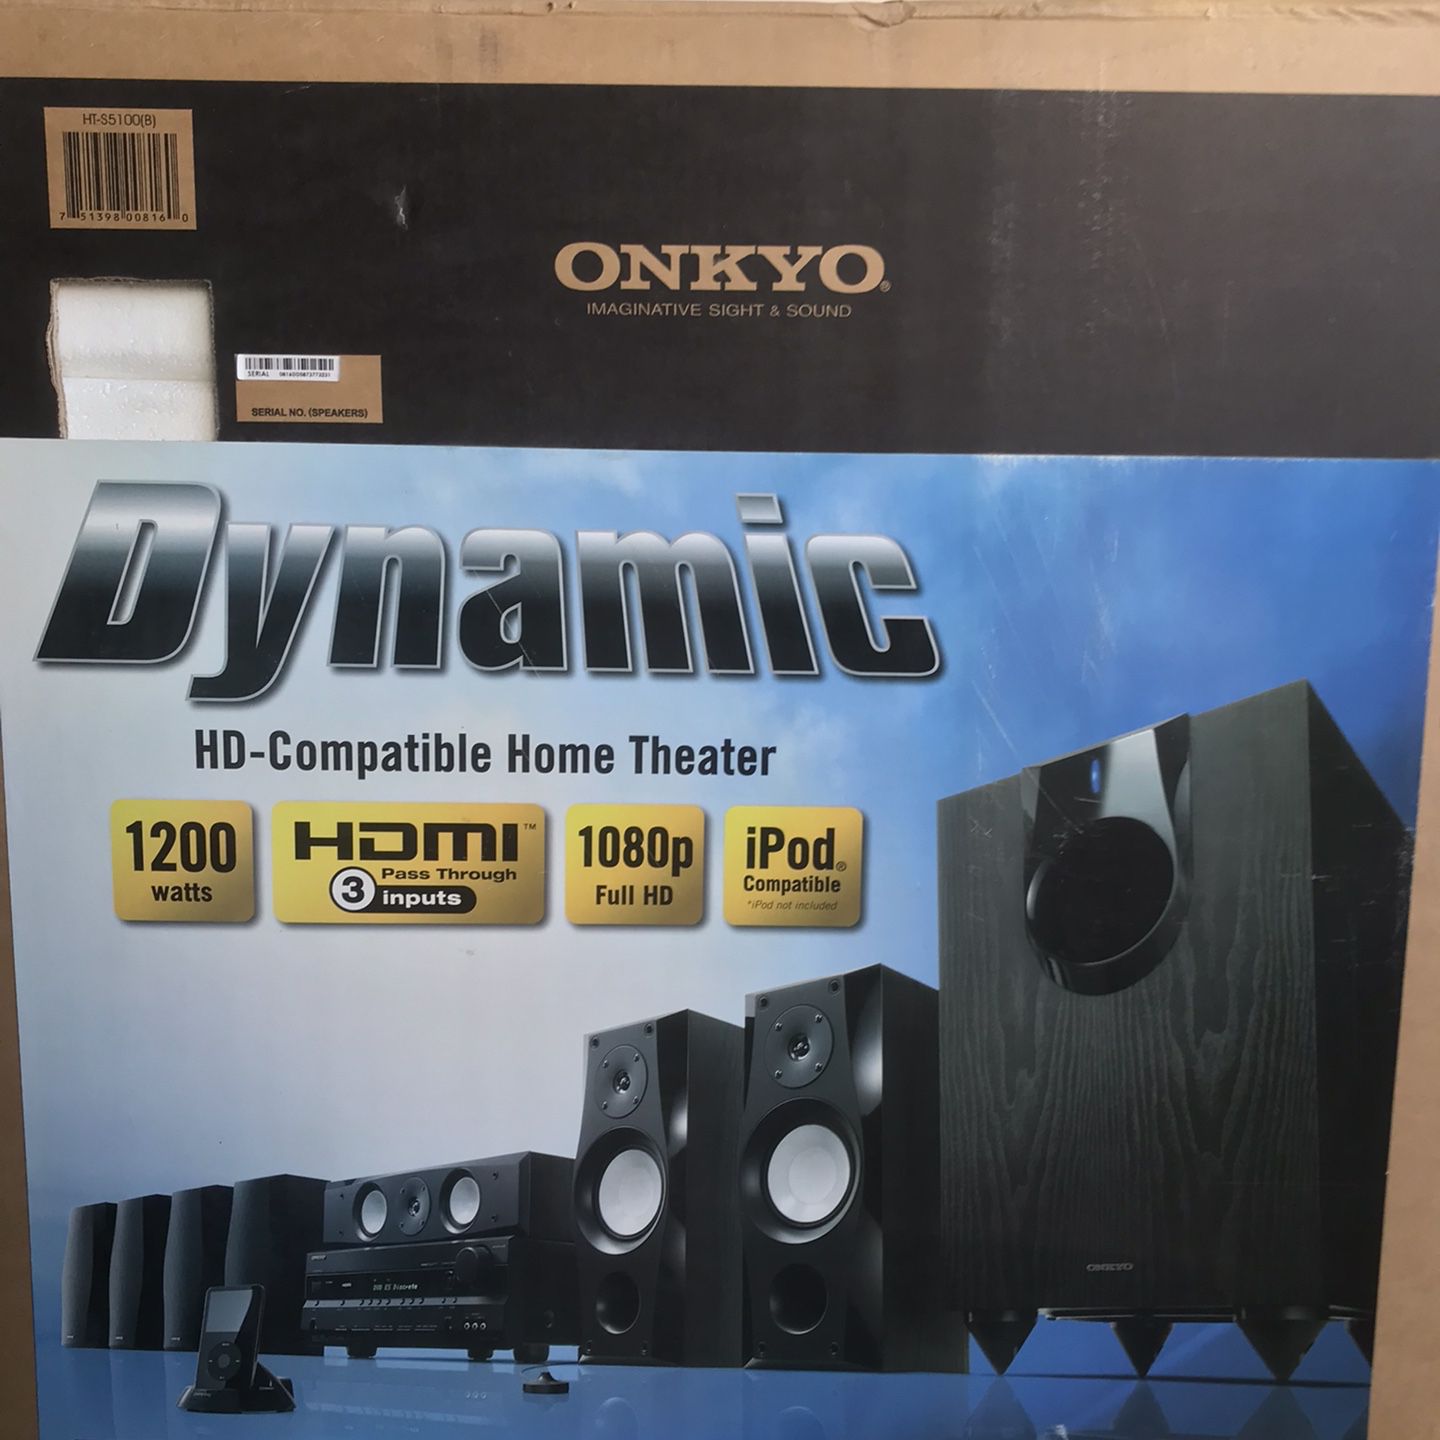 Onkyo 7.1 channel HDMI Home Theater System